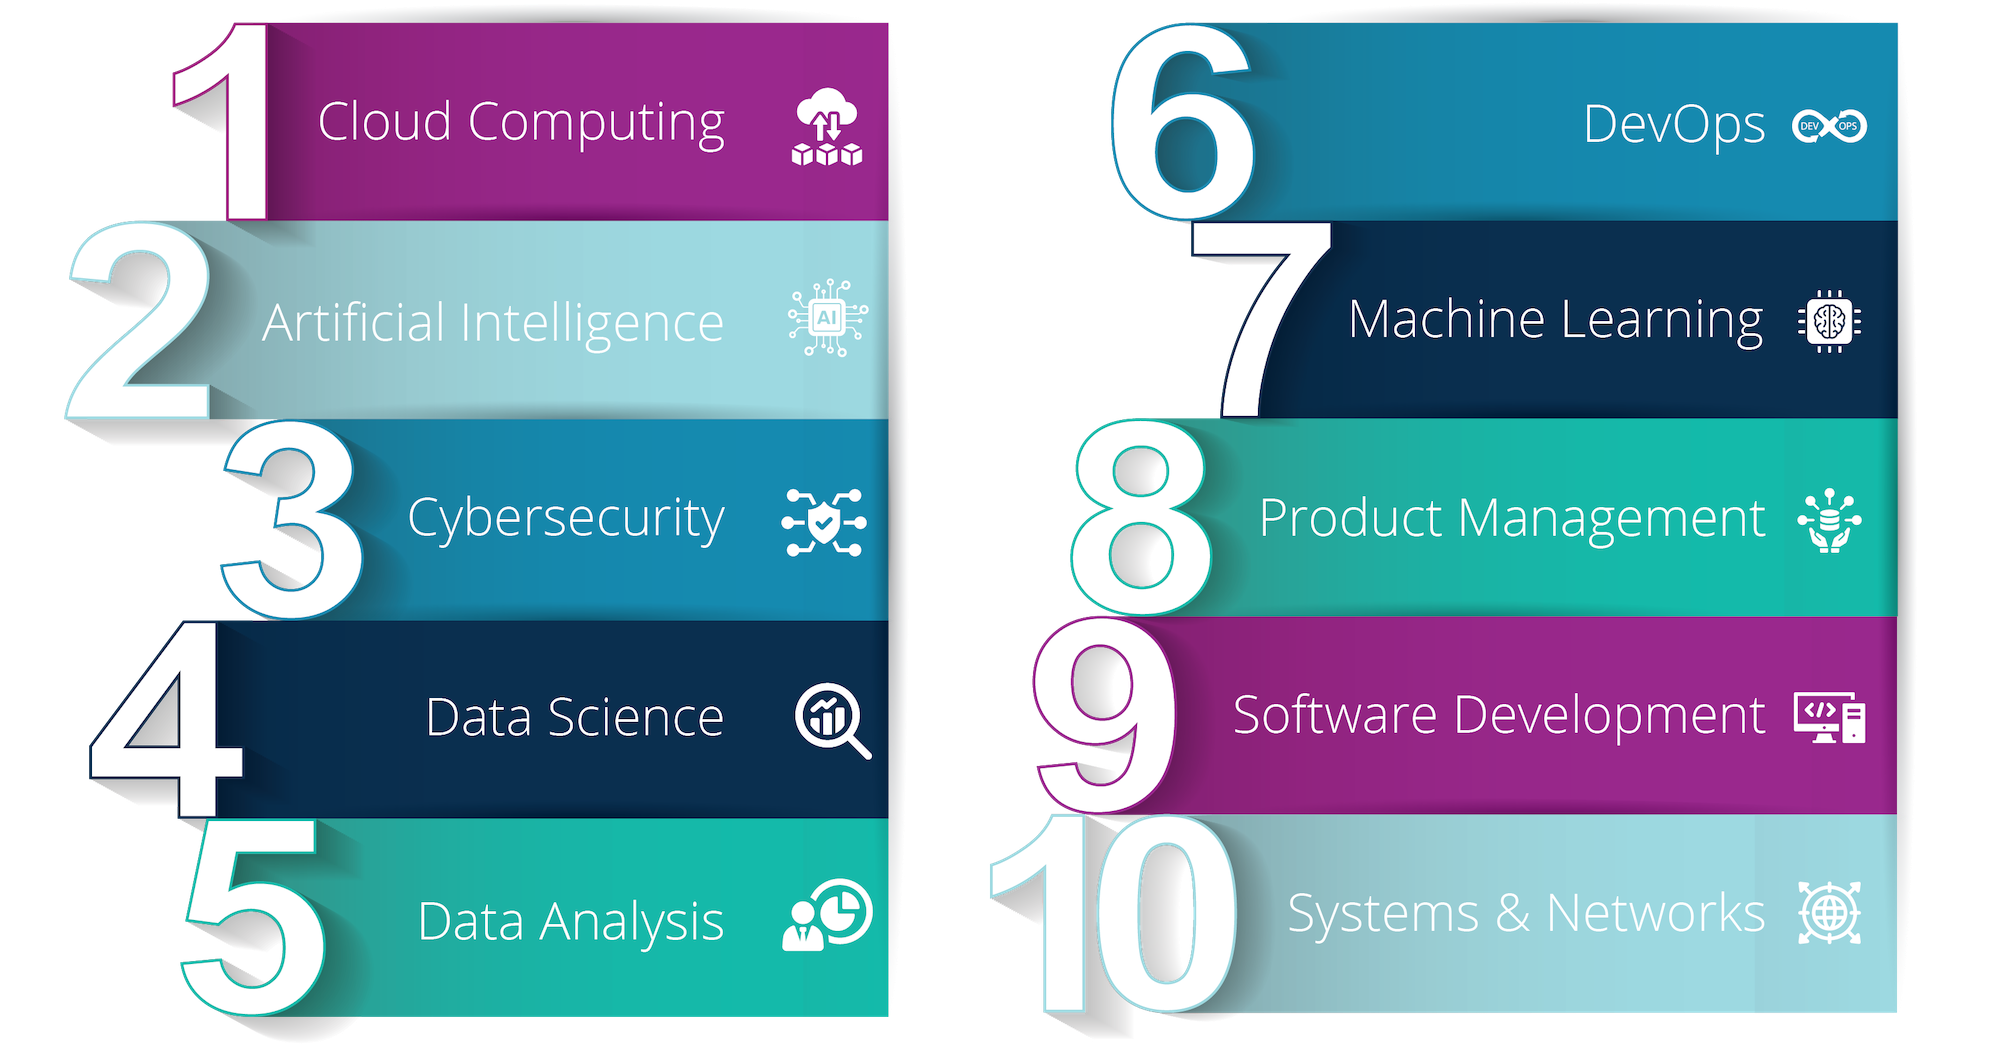 Top 10 IT Skills for 2023: 1. Cloud Computing, 2. Artificial Intelligence, 3. Cybersecurity, 4. Data Science, 5. Data Analysis, 6. DevOps, 7. Machine Learning, 8. Product Management, 9. Software Development, 10. Systems and Networks